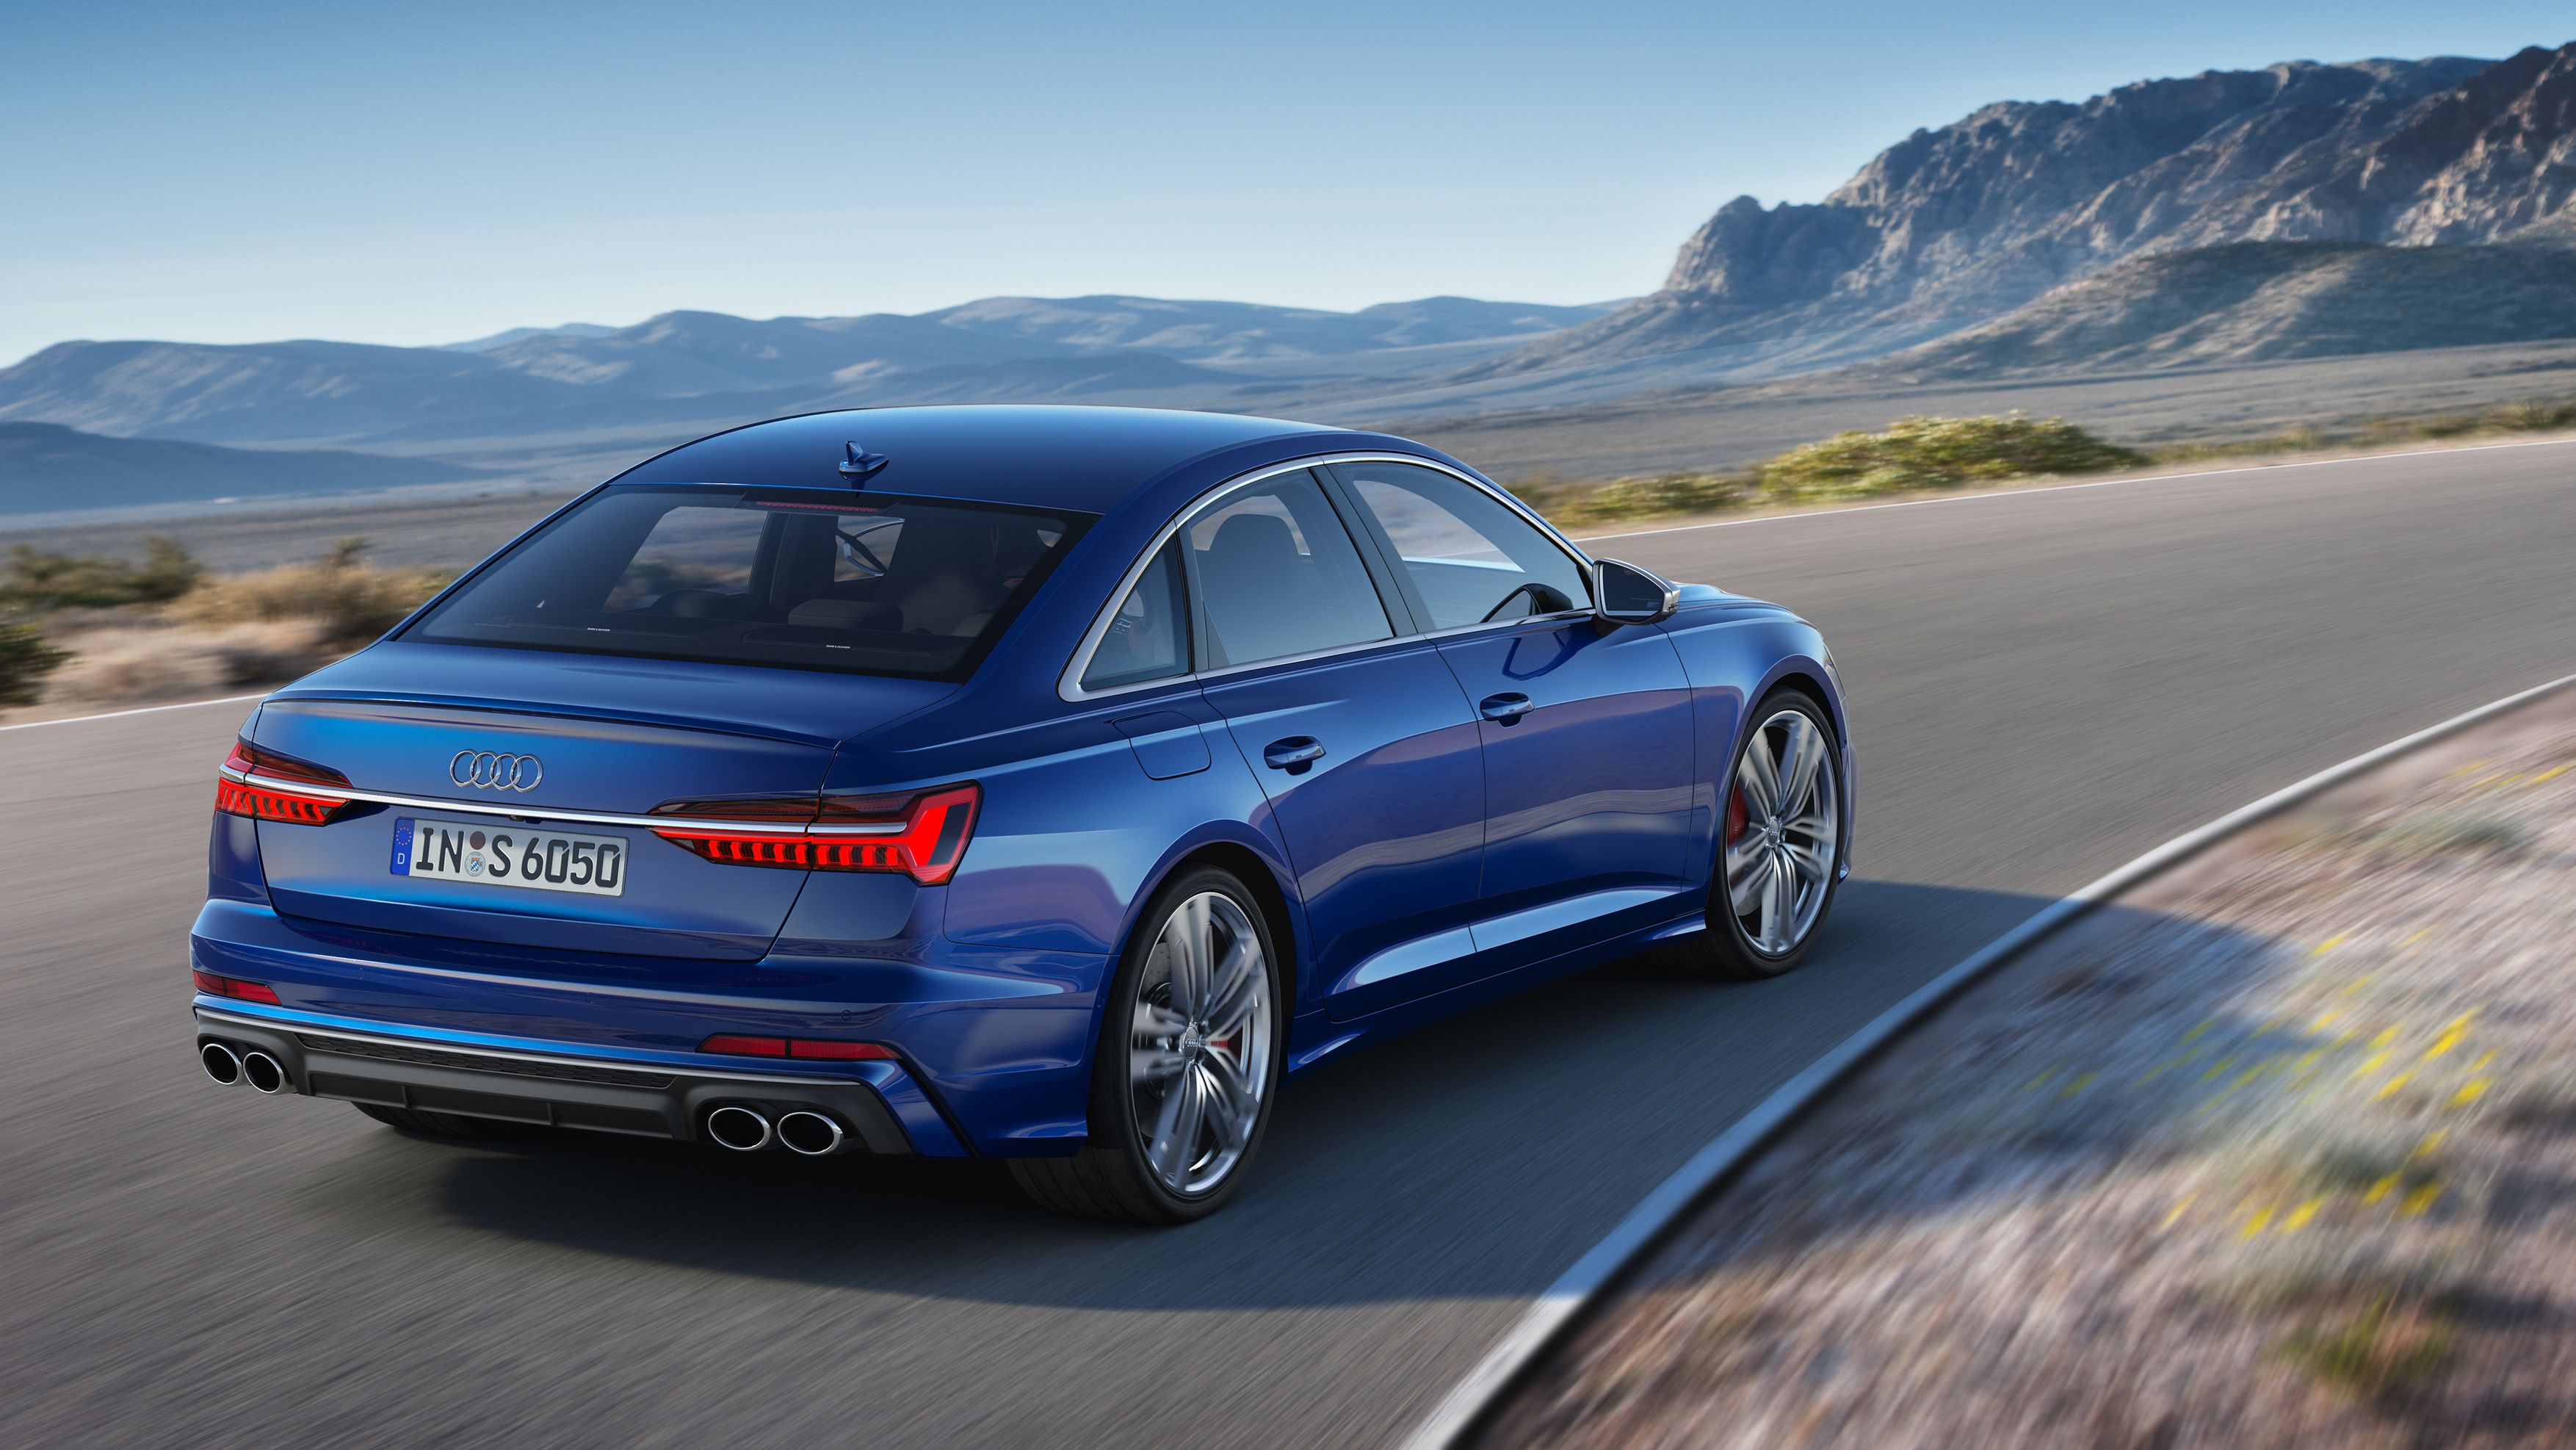 2020 Audi S6 and S7 Revealed - Pictures, Price, Specs, Horsepower